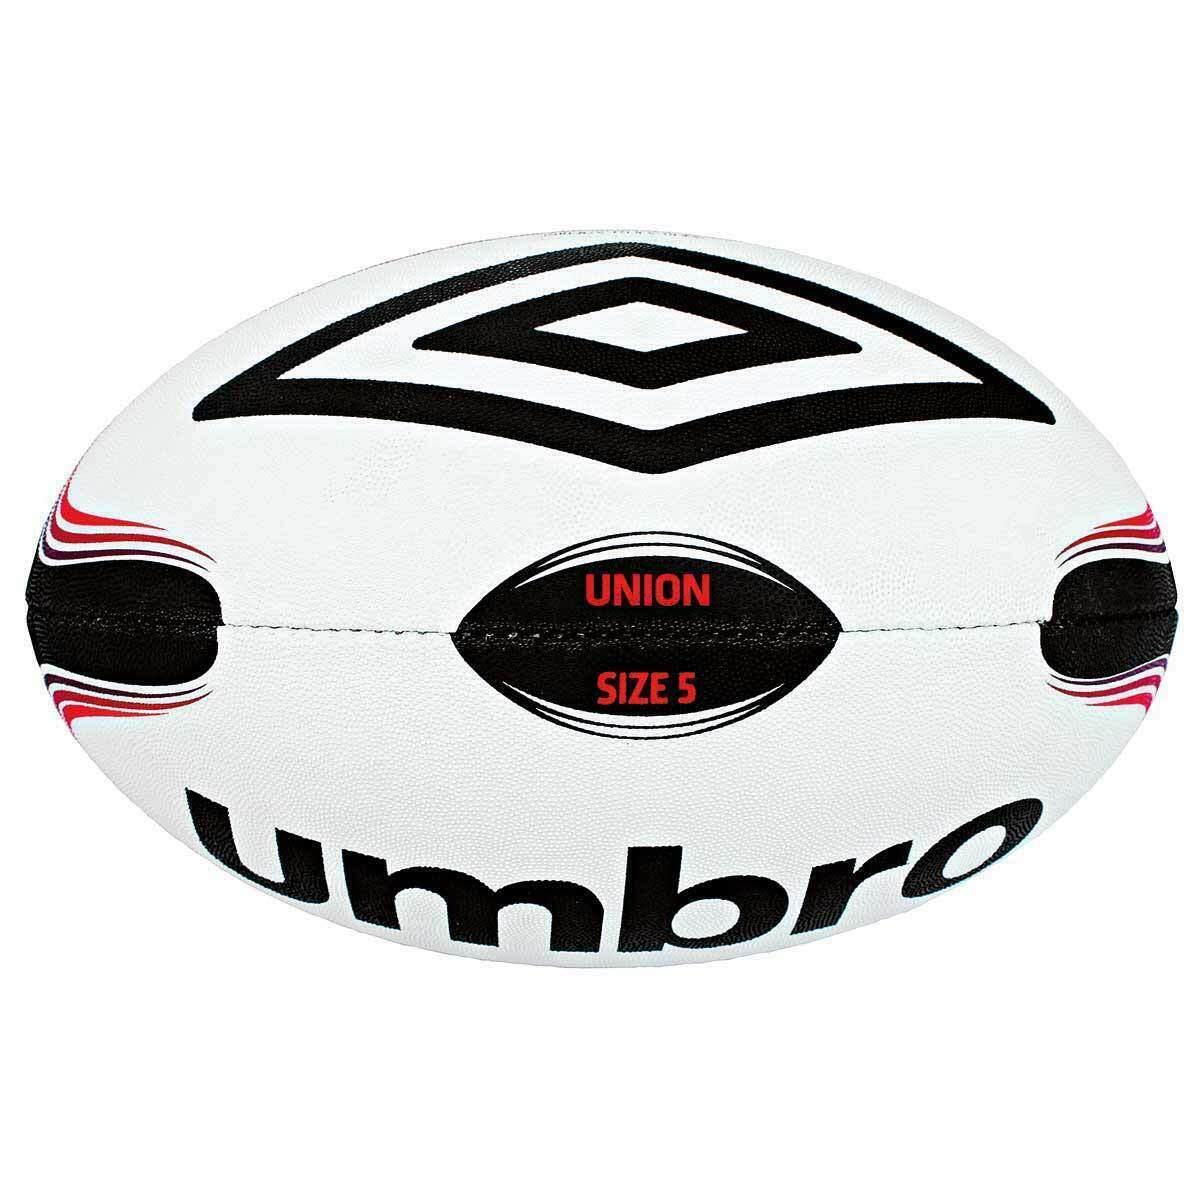 Umbro Training Rugby Ball Size 5 4/6